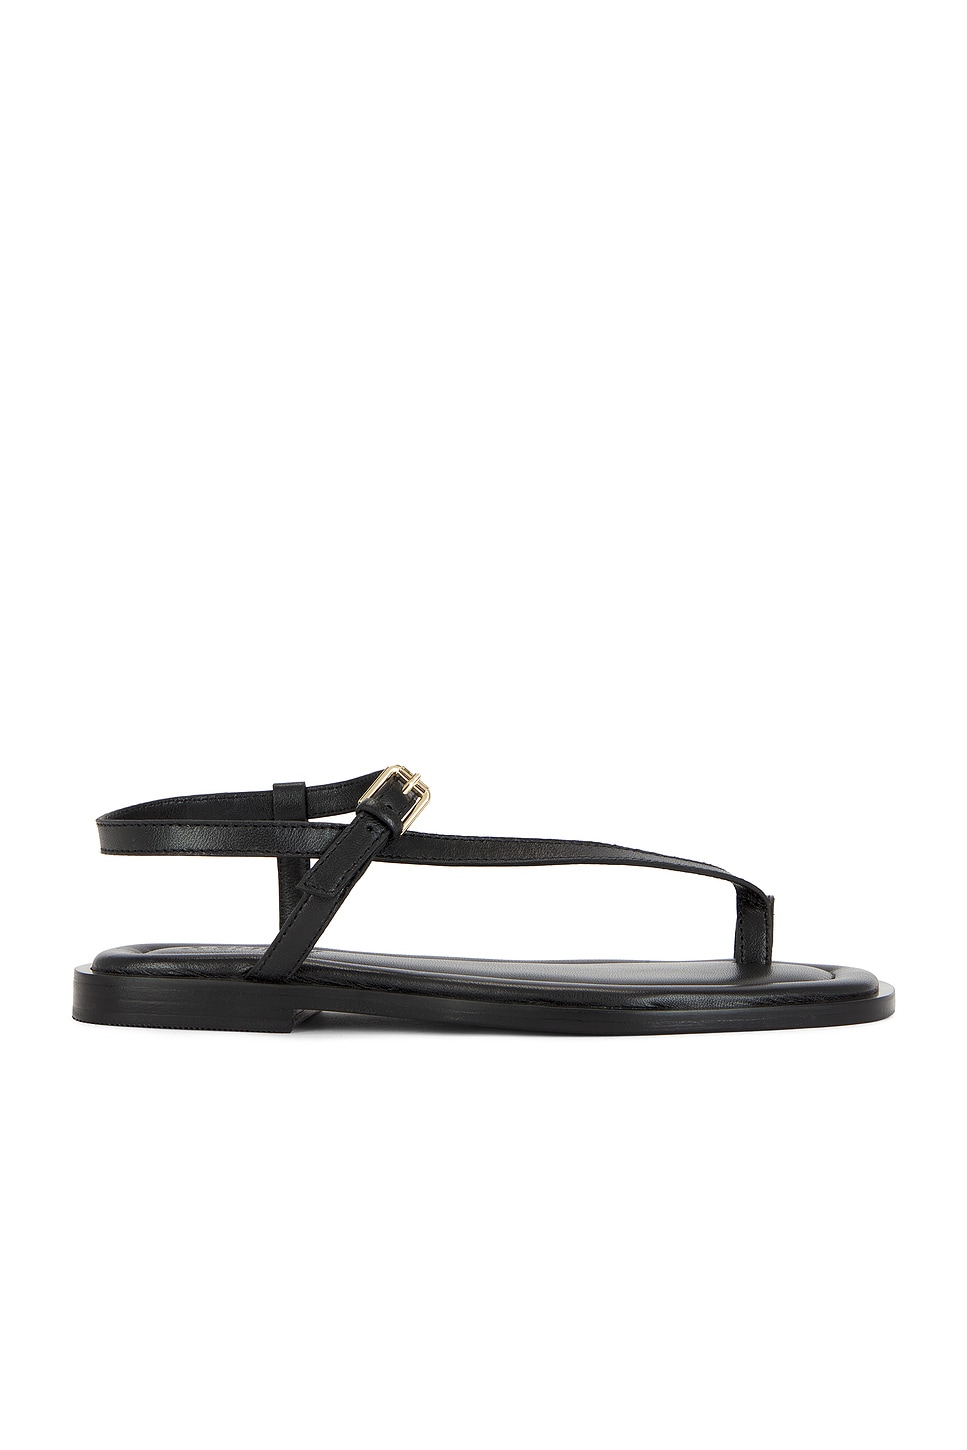 Image 1 of A.EMERY Pae Sandal in Black